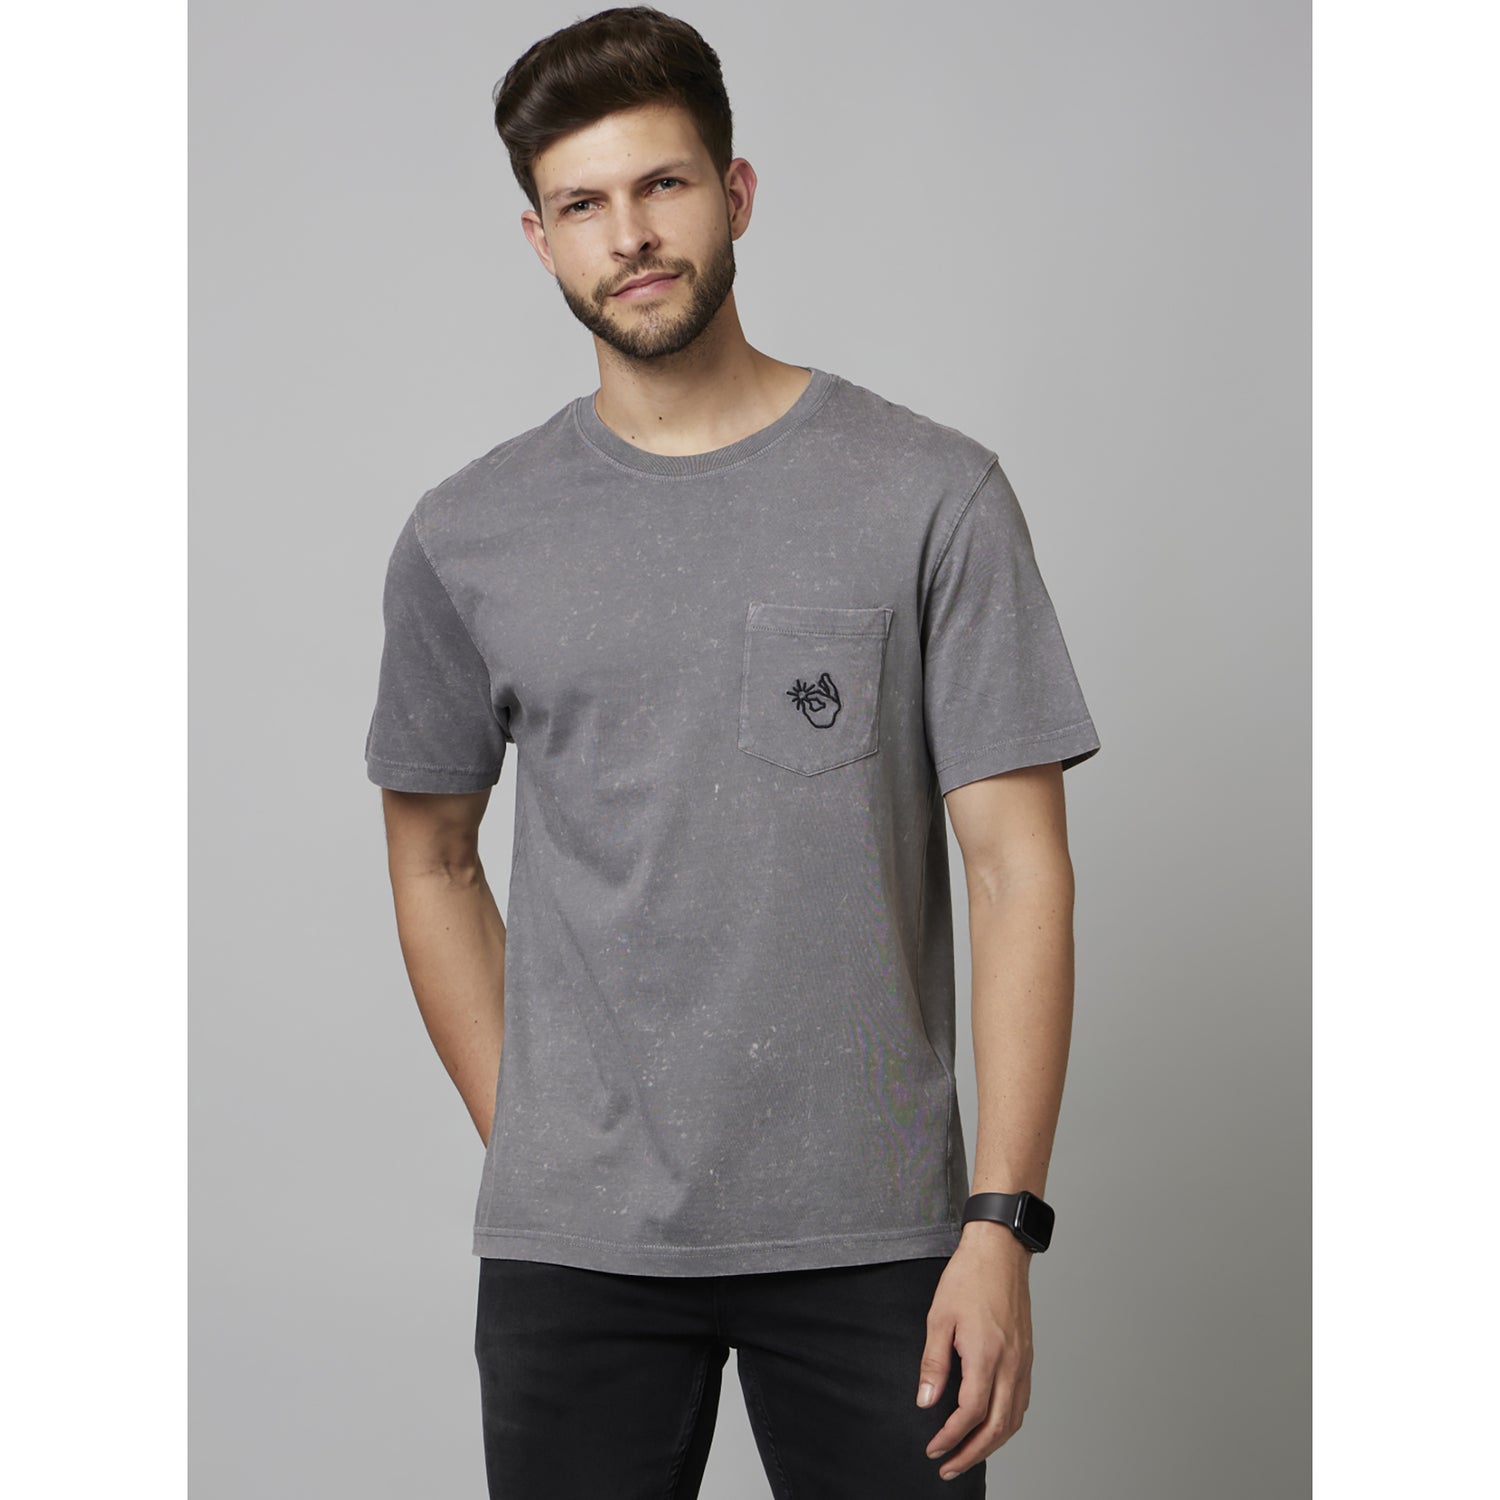 Grey Embroidered Half Sleeve Cotton T-Shirts (FECIDE)